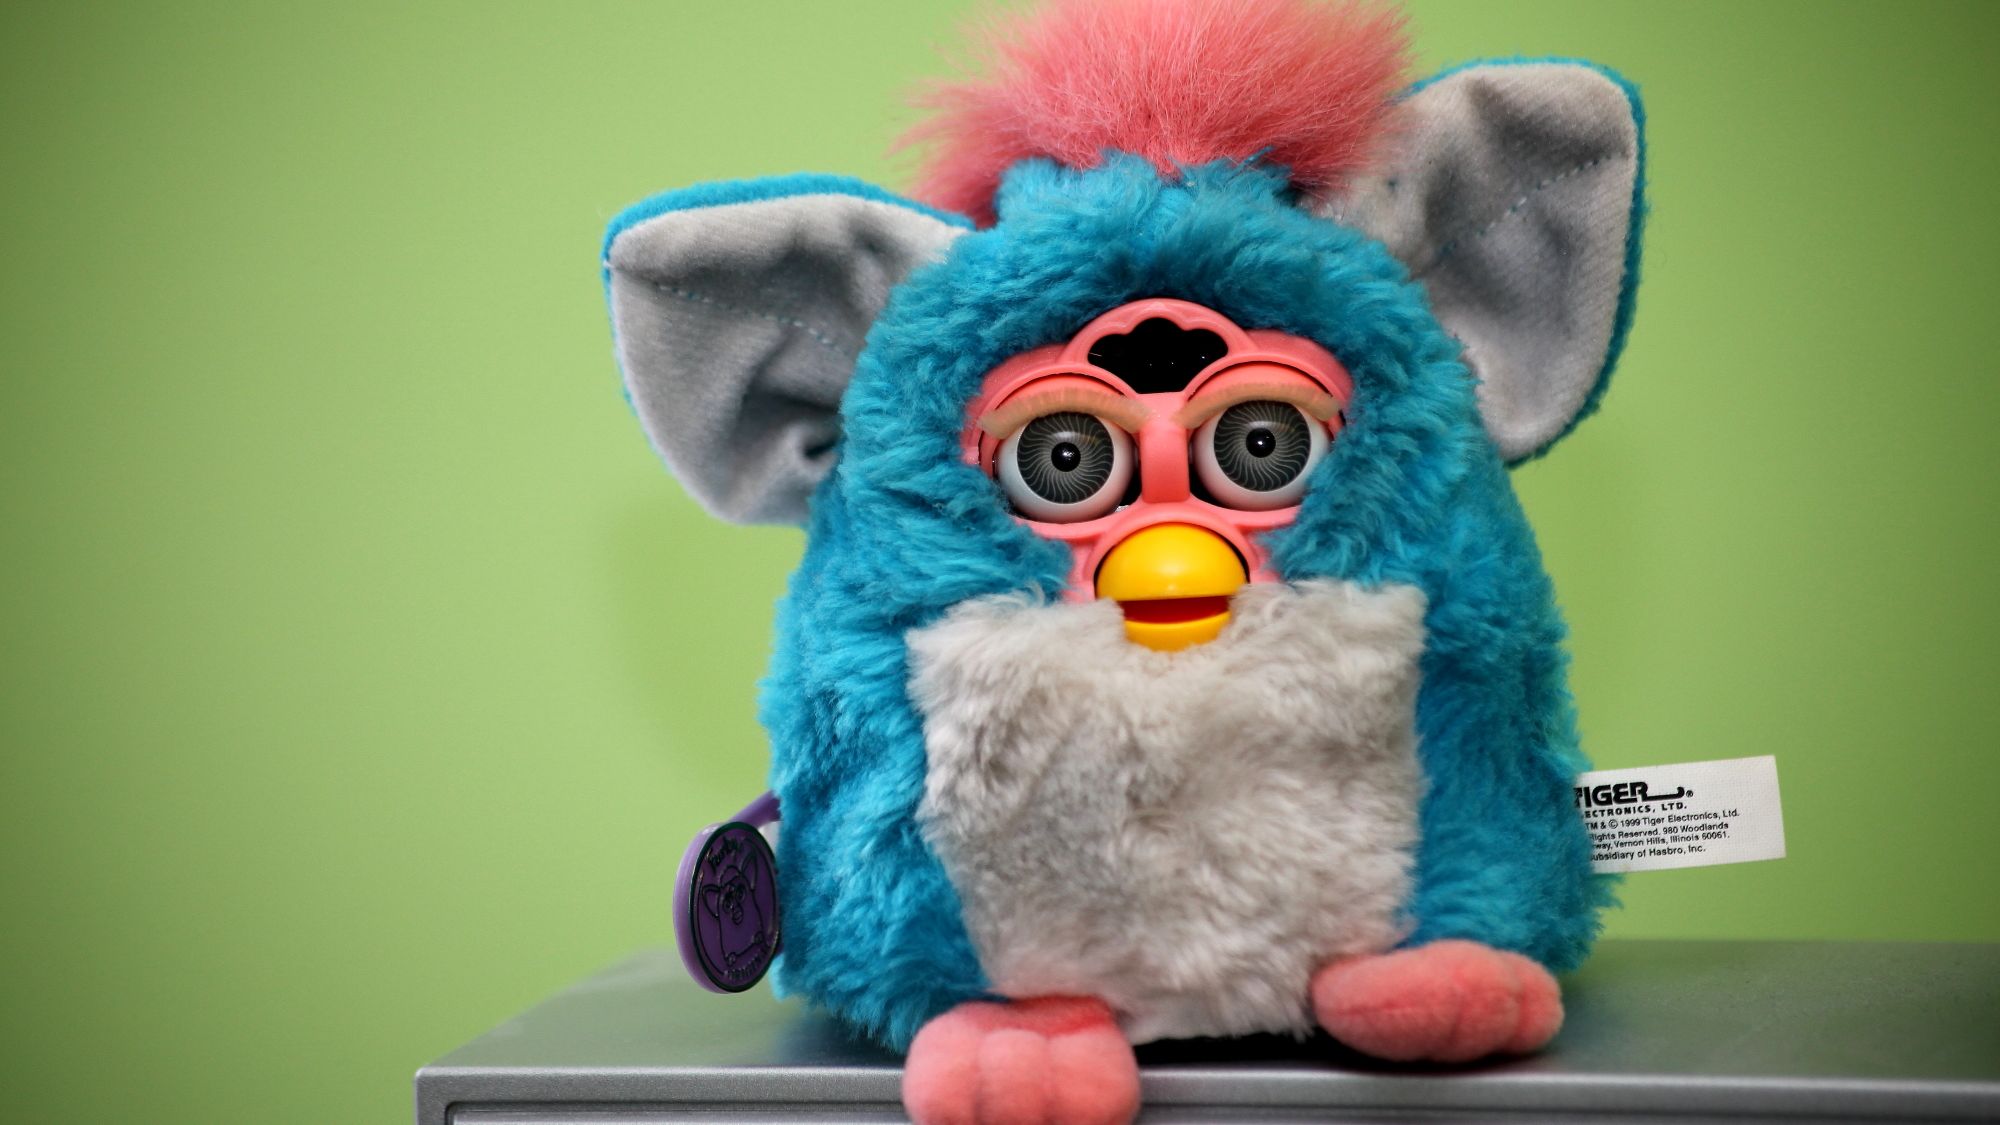 stuffed animals that are worth a lot of money